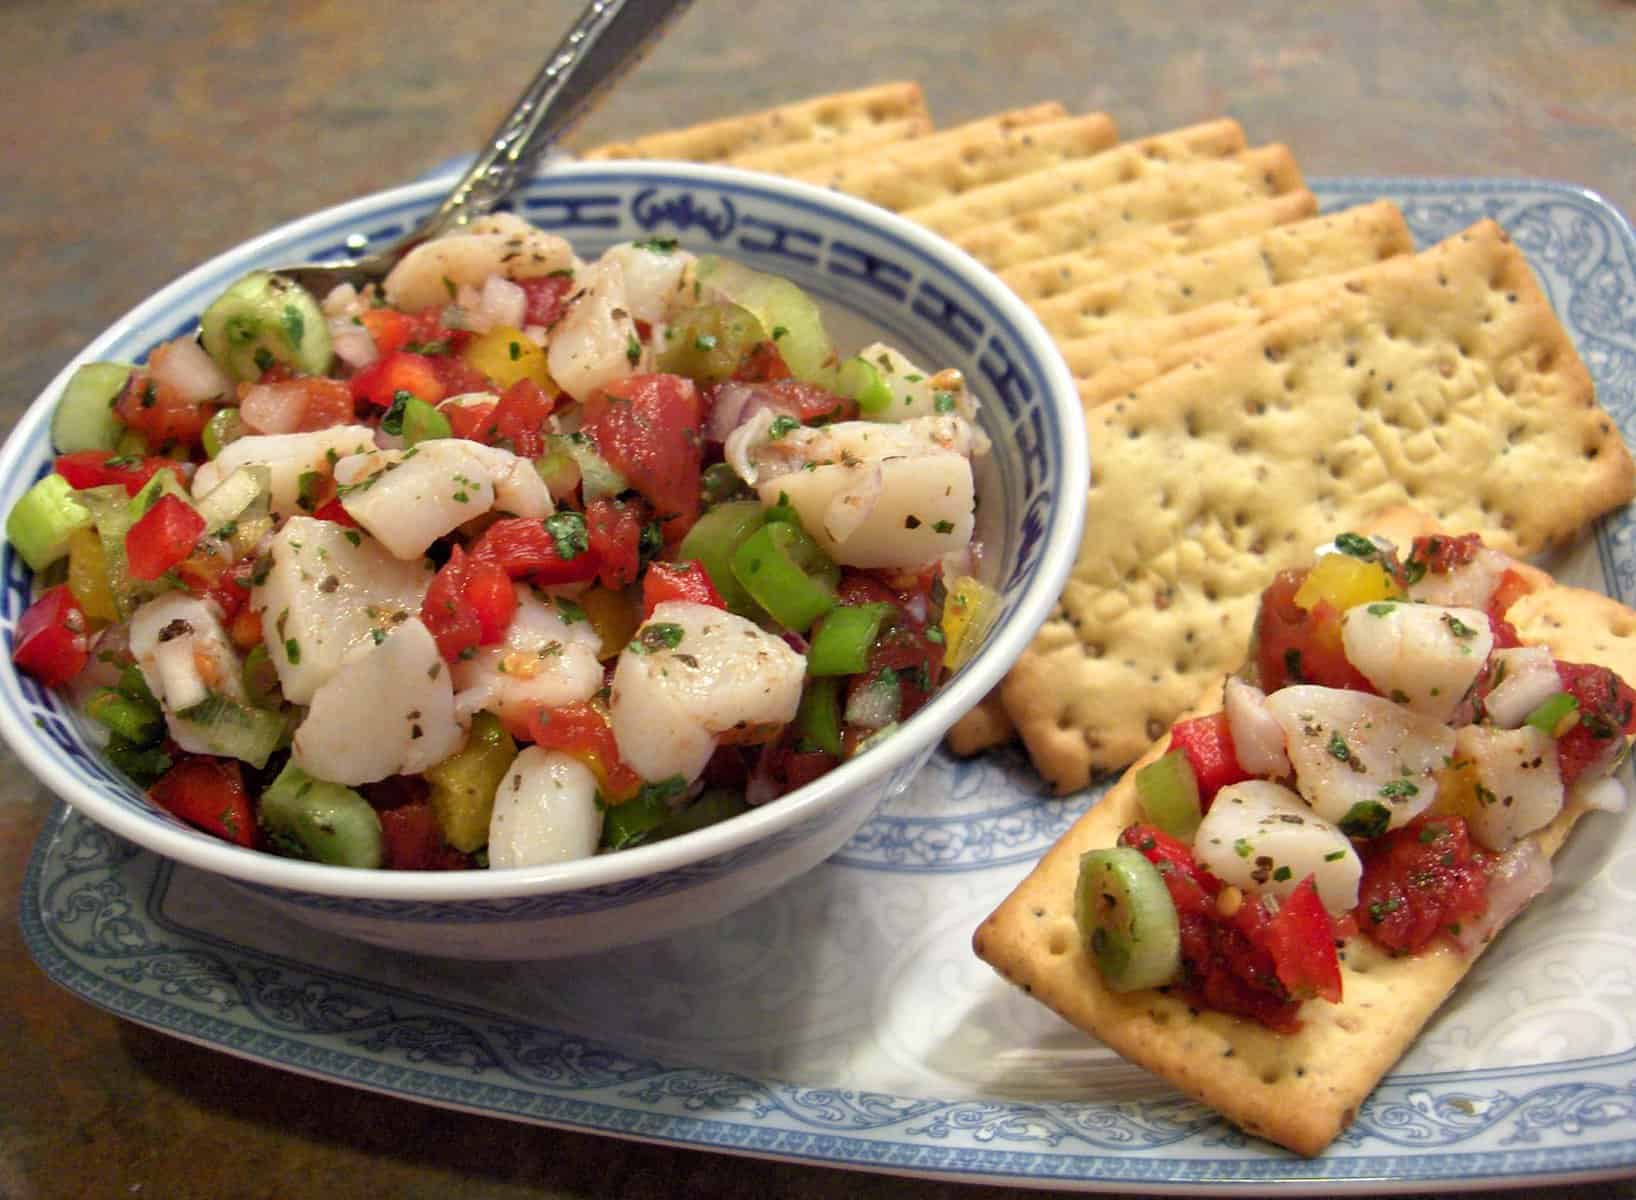  Let's spice things up with this zesty ceviche that bursts with flavor.